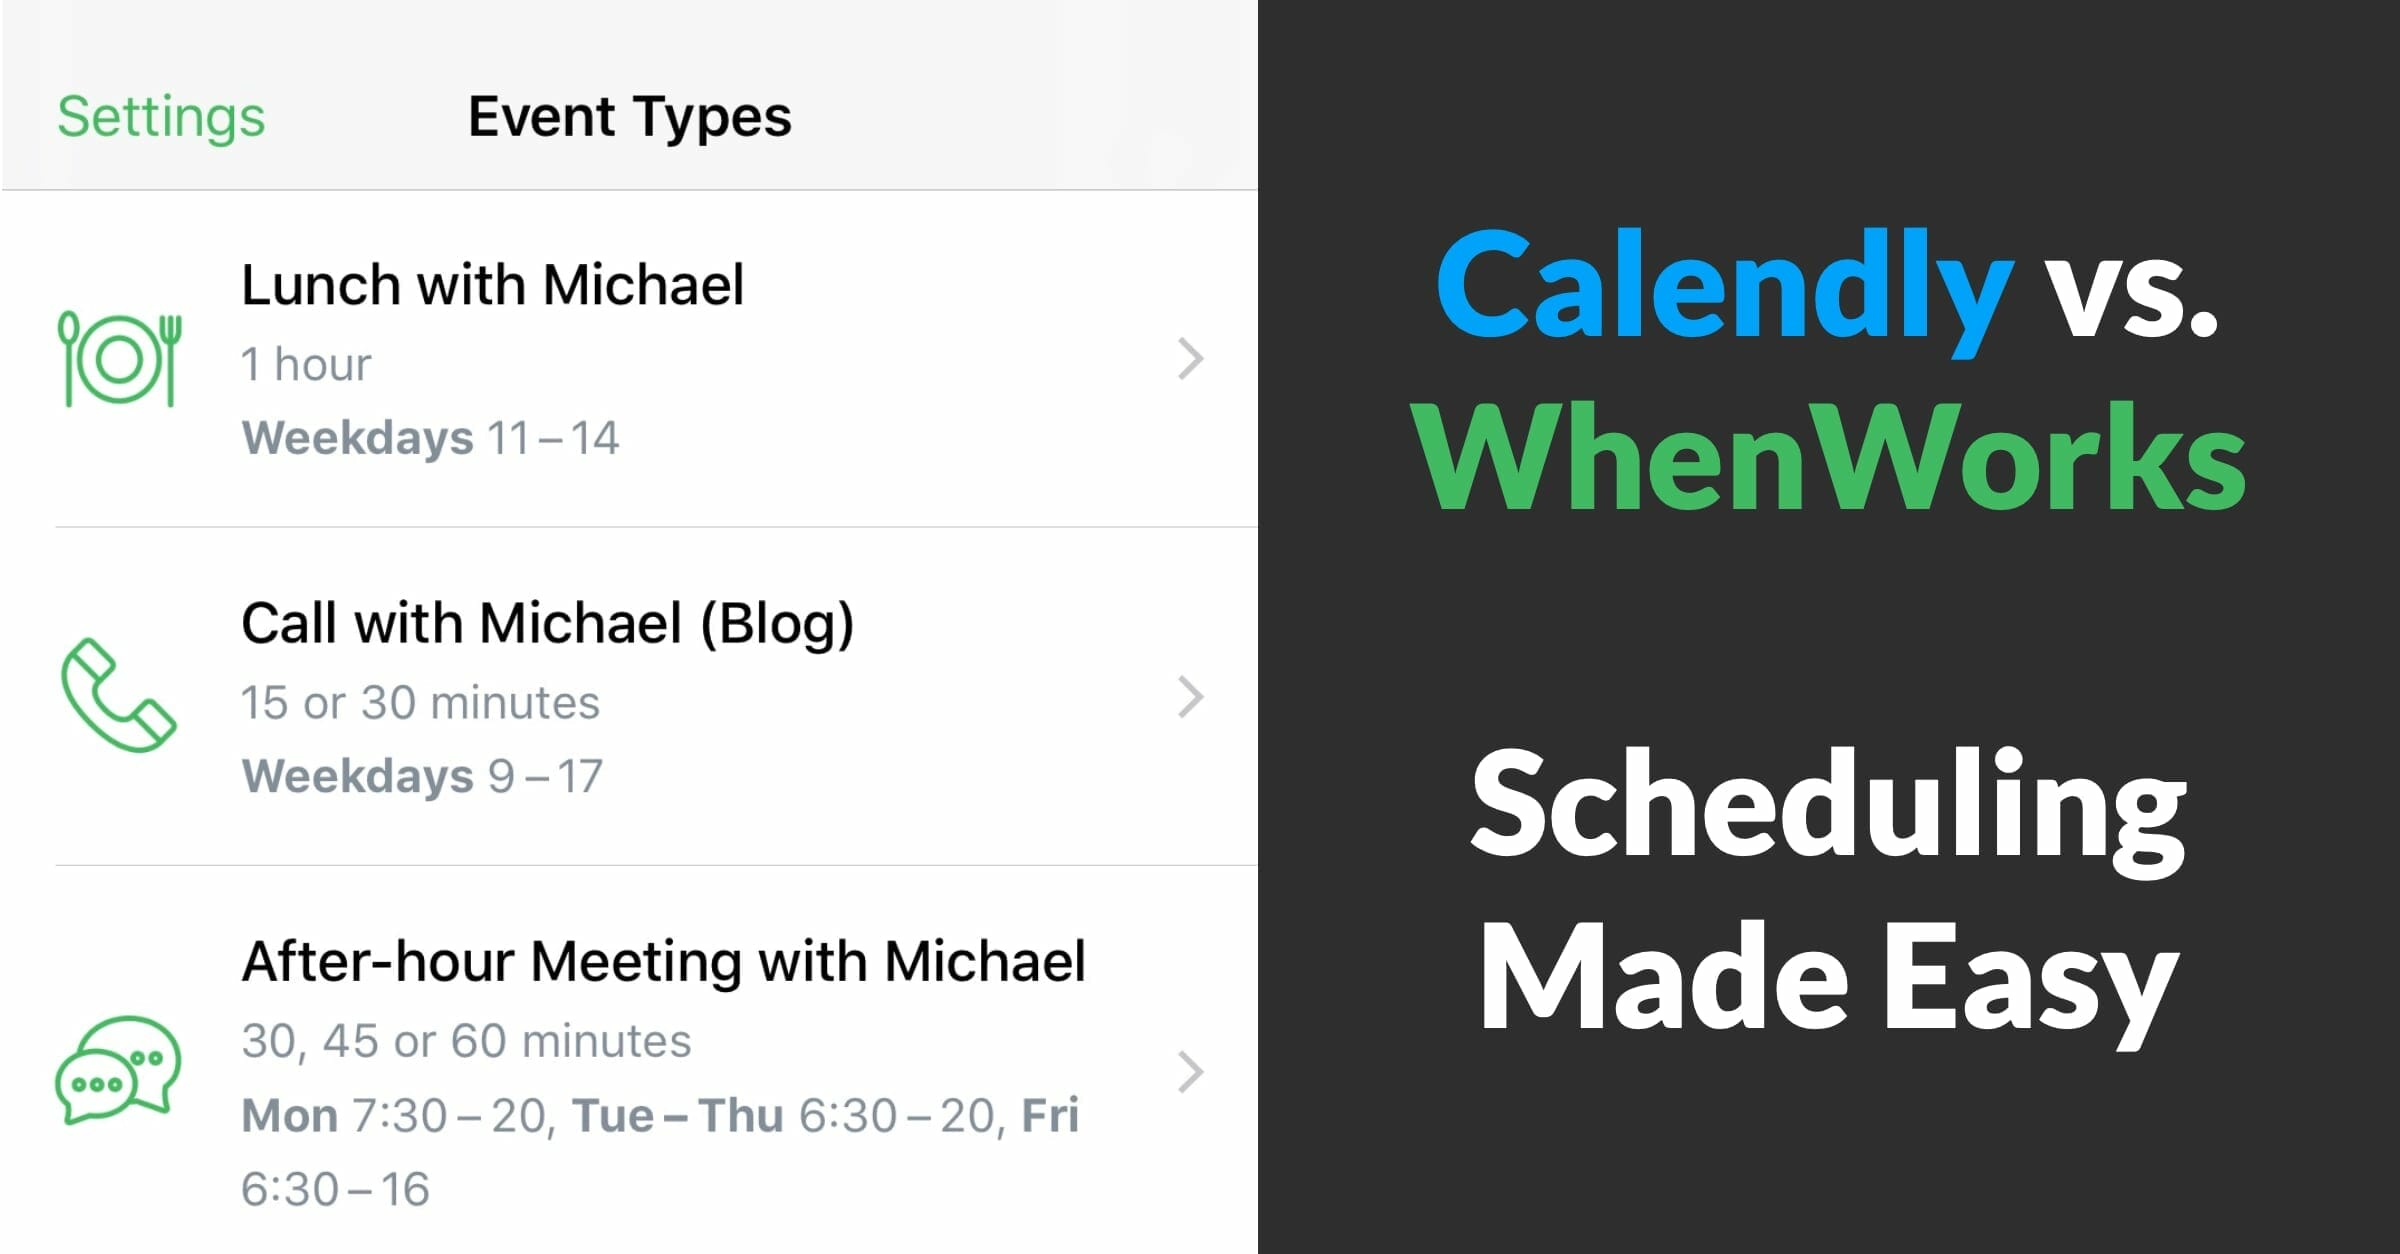 Calendly vs. WhenWorks - Review of scheduling apps